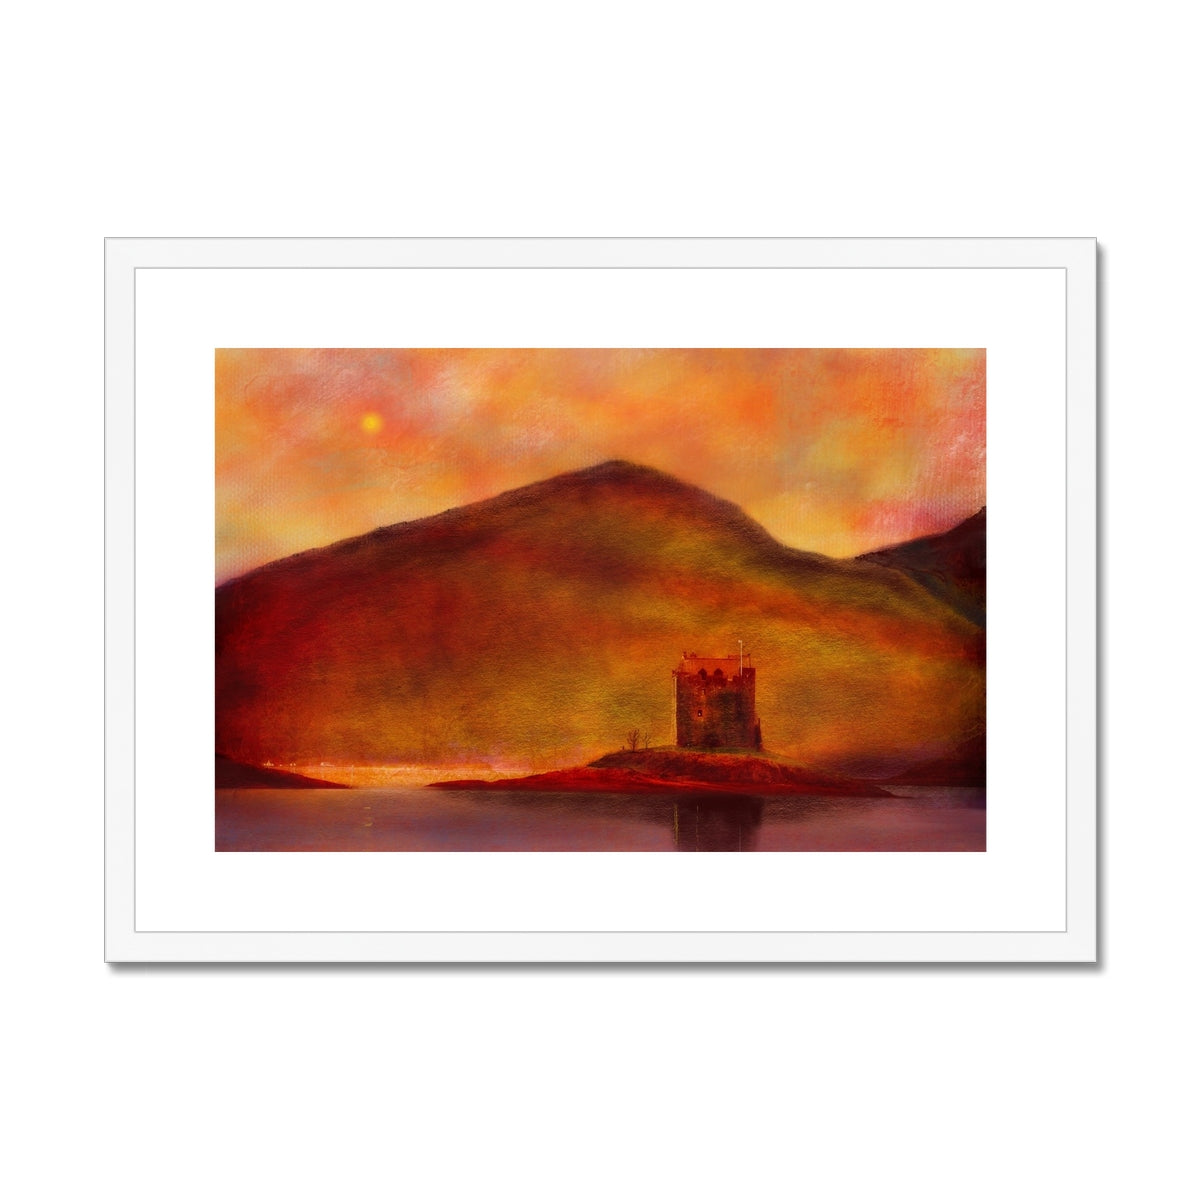 Castle Stalker Sunset Painting | Framed & Mounted Prints From Scotland-Framed & Mounted Prints-Historic & Iconic Scotland Art Gallery-A2 Landscape-White Frame-Paintings, Prints, Homeware, Art Gifts From Scotland By Scottish Artist Kevin Hunter